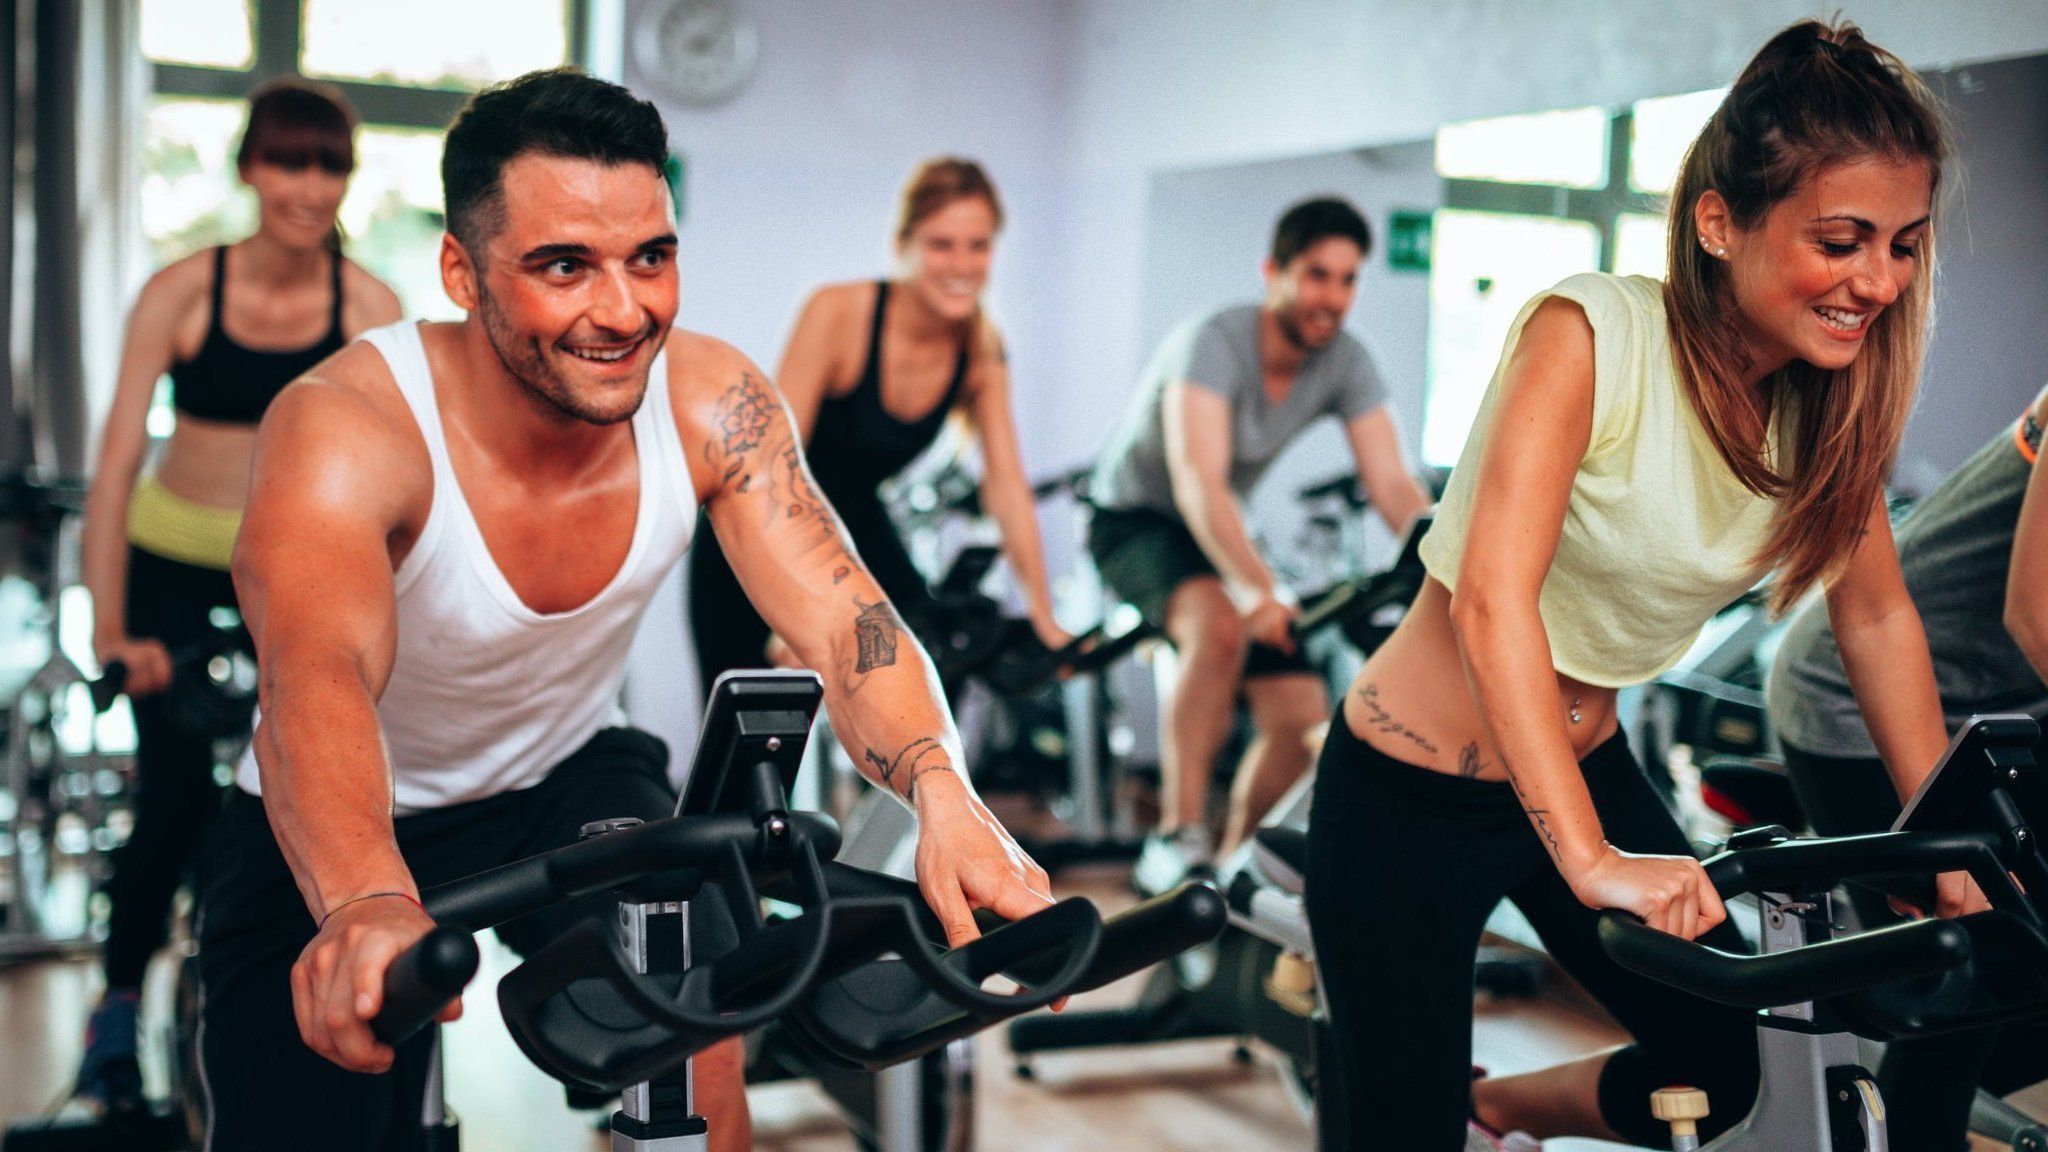 People in a spinning class